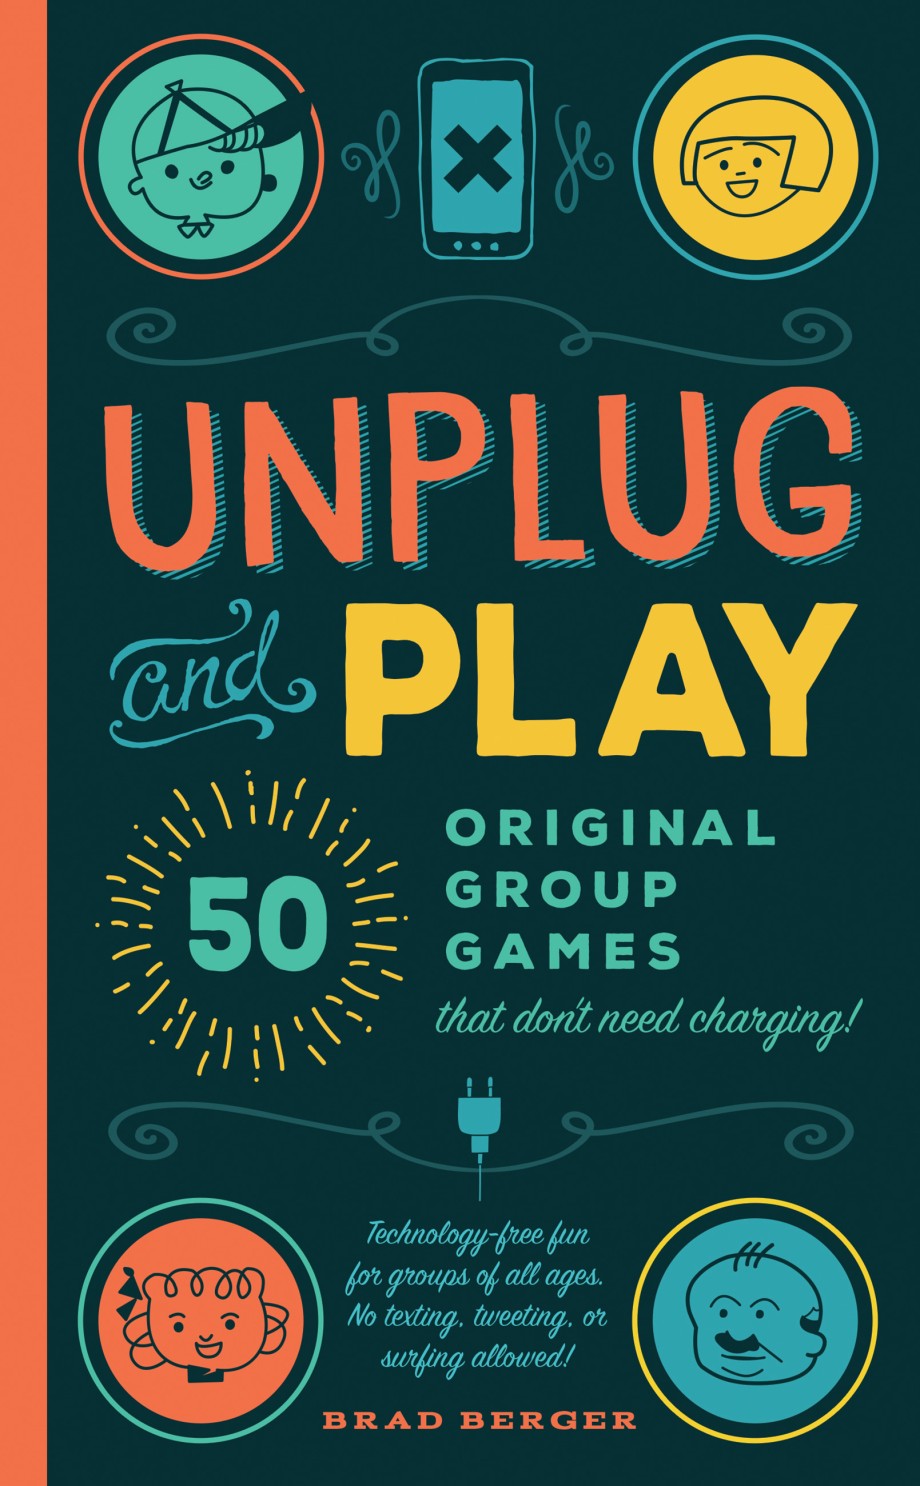 Unplug and Play 50 Original Group Games That Don't Need Charging